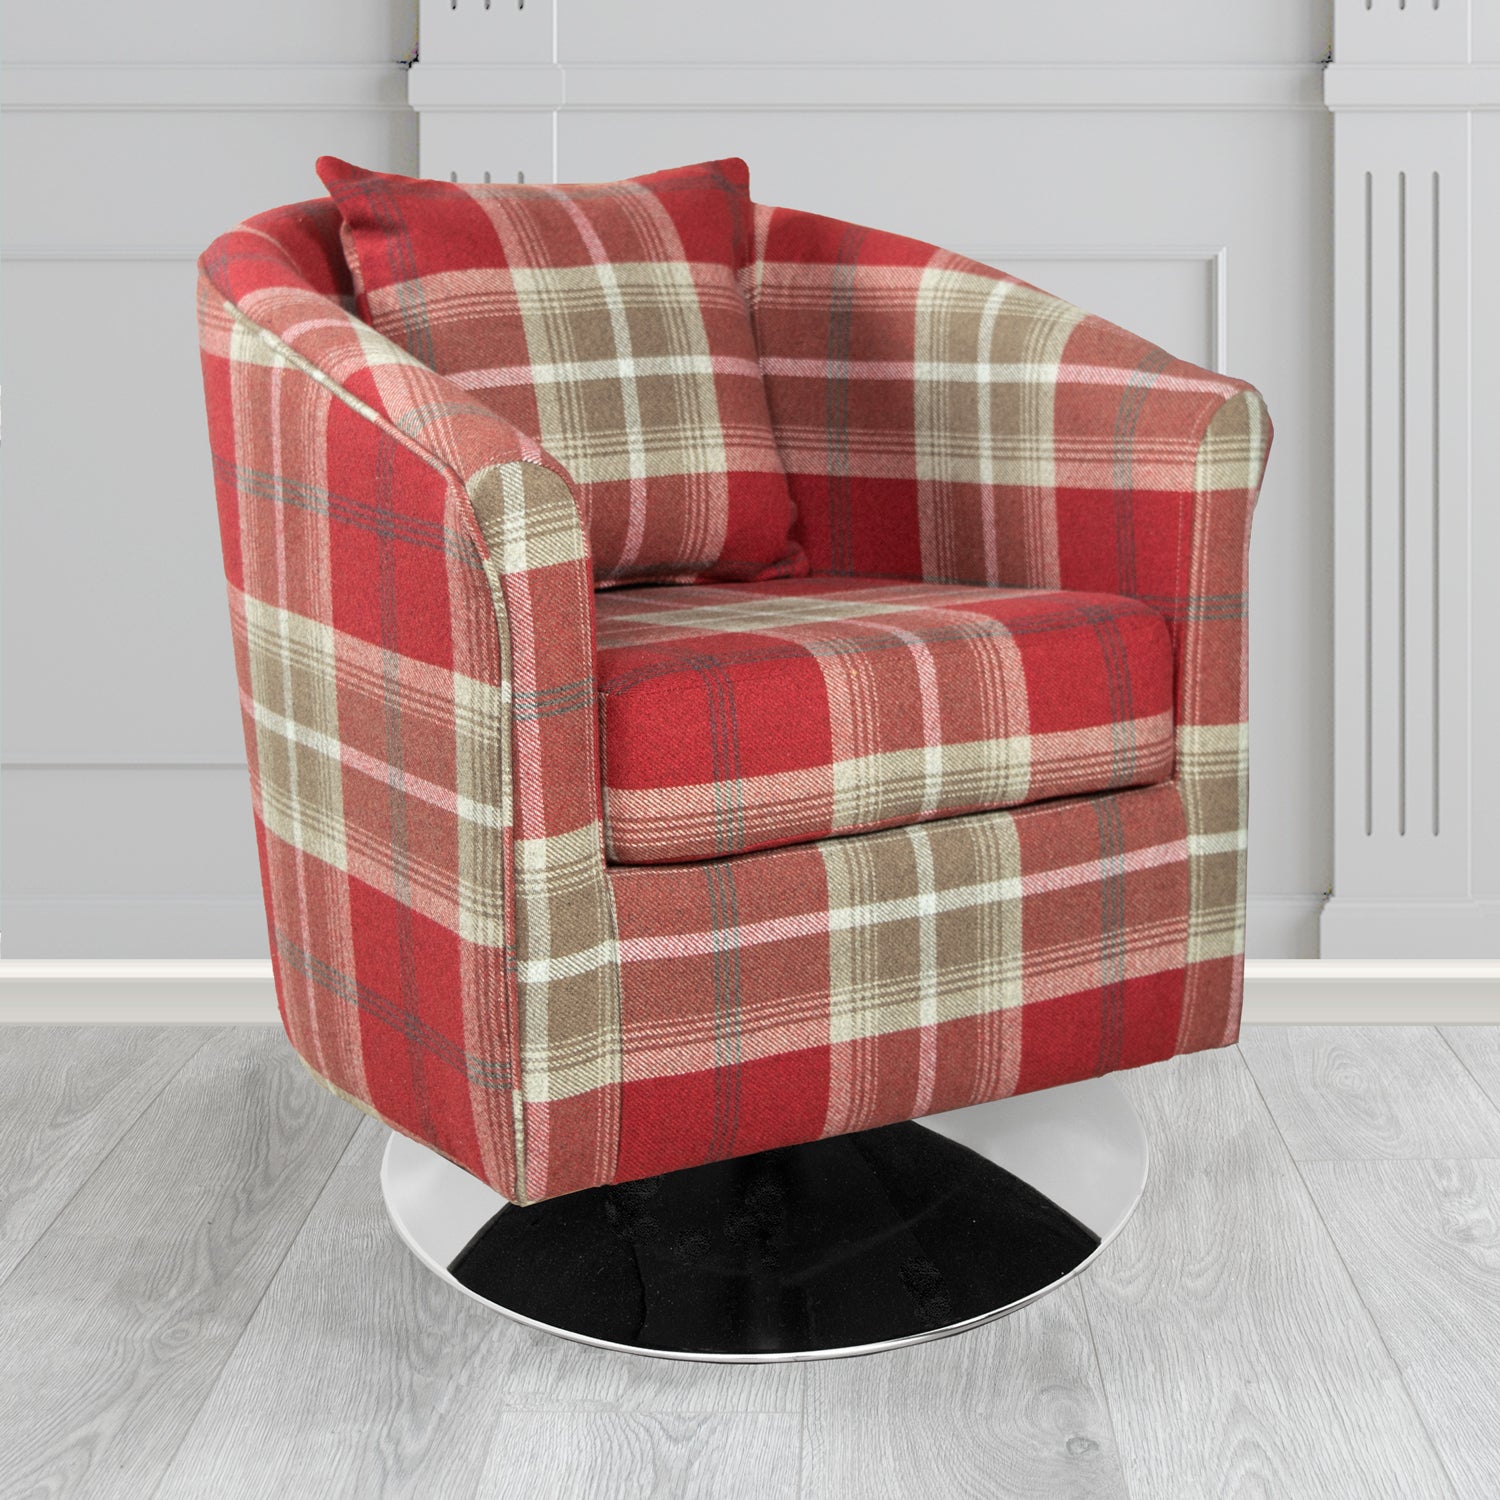 St Tropez Balmoral Red Tartan Fabric Swivel Tub Chair with Scatter Cushion - The Tub Chair Shop